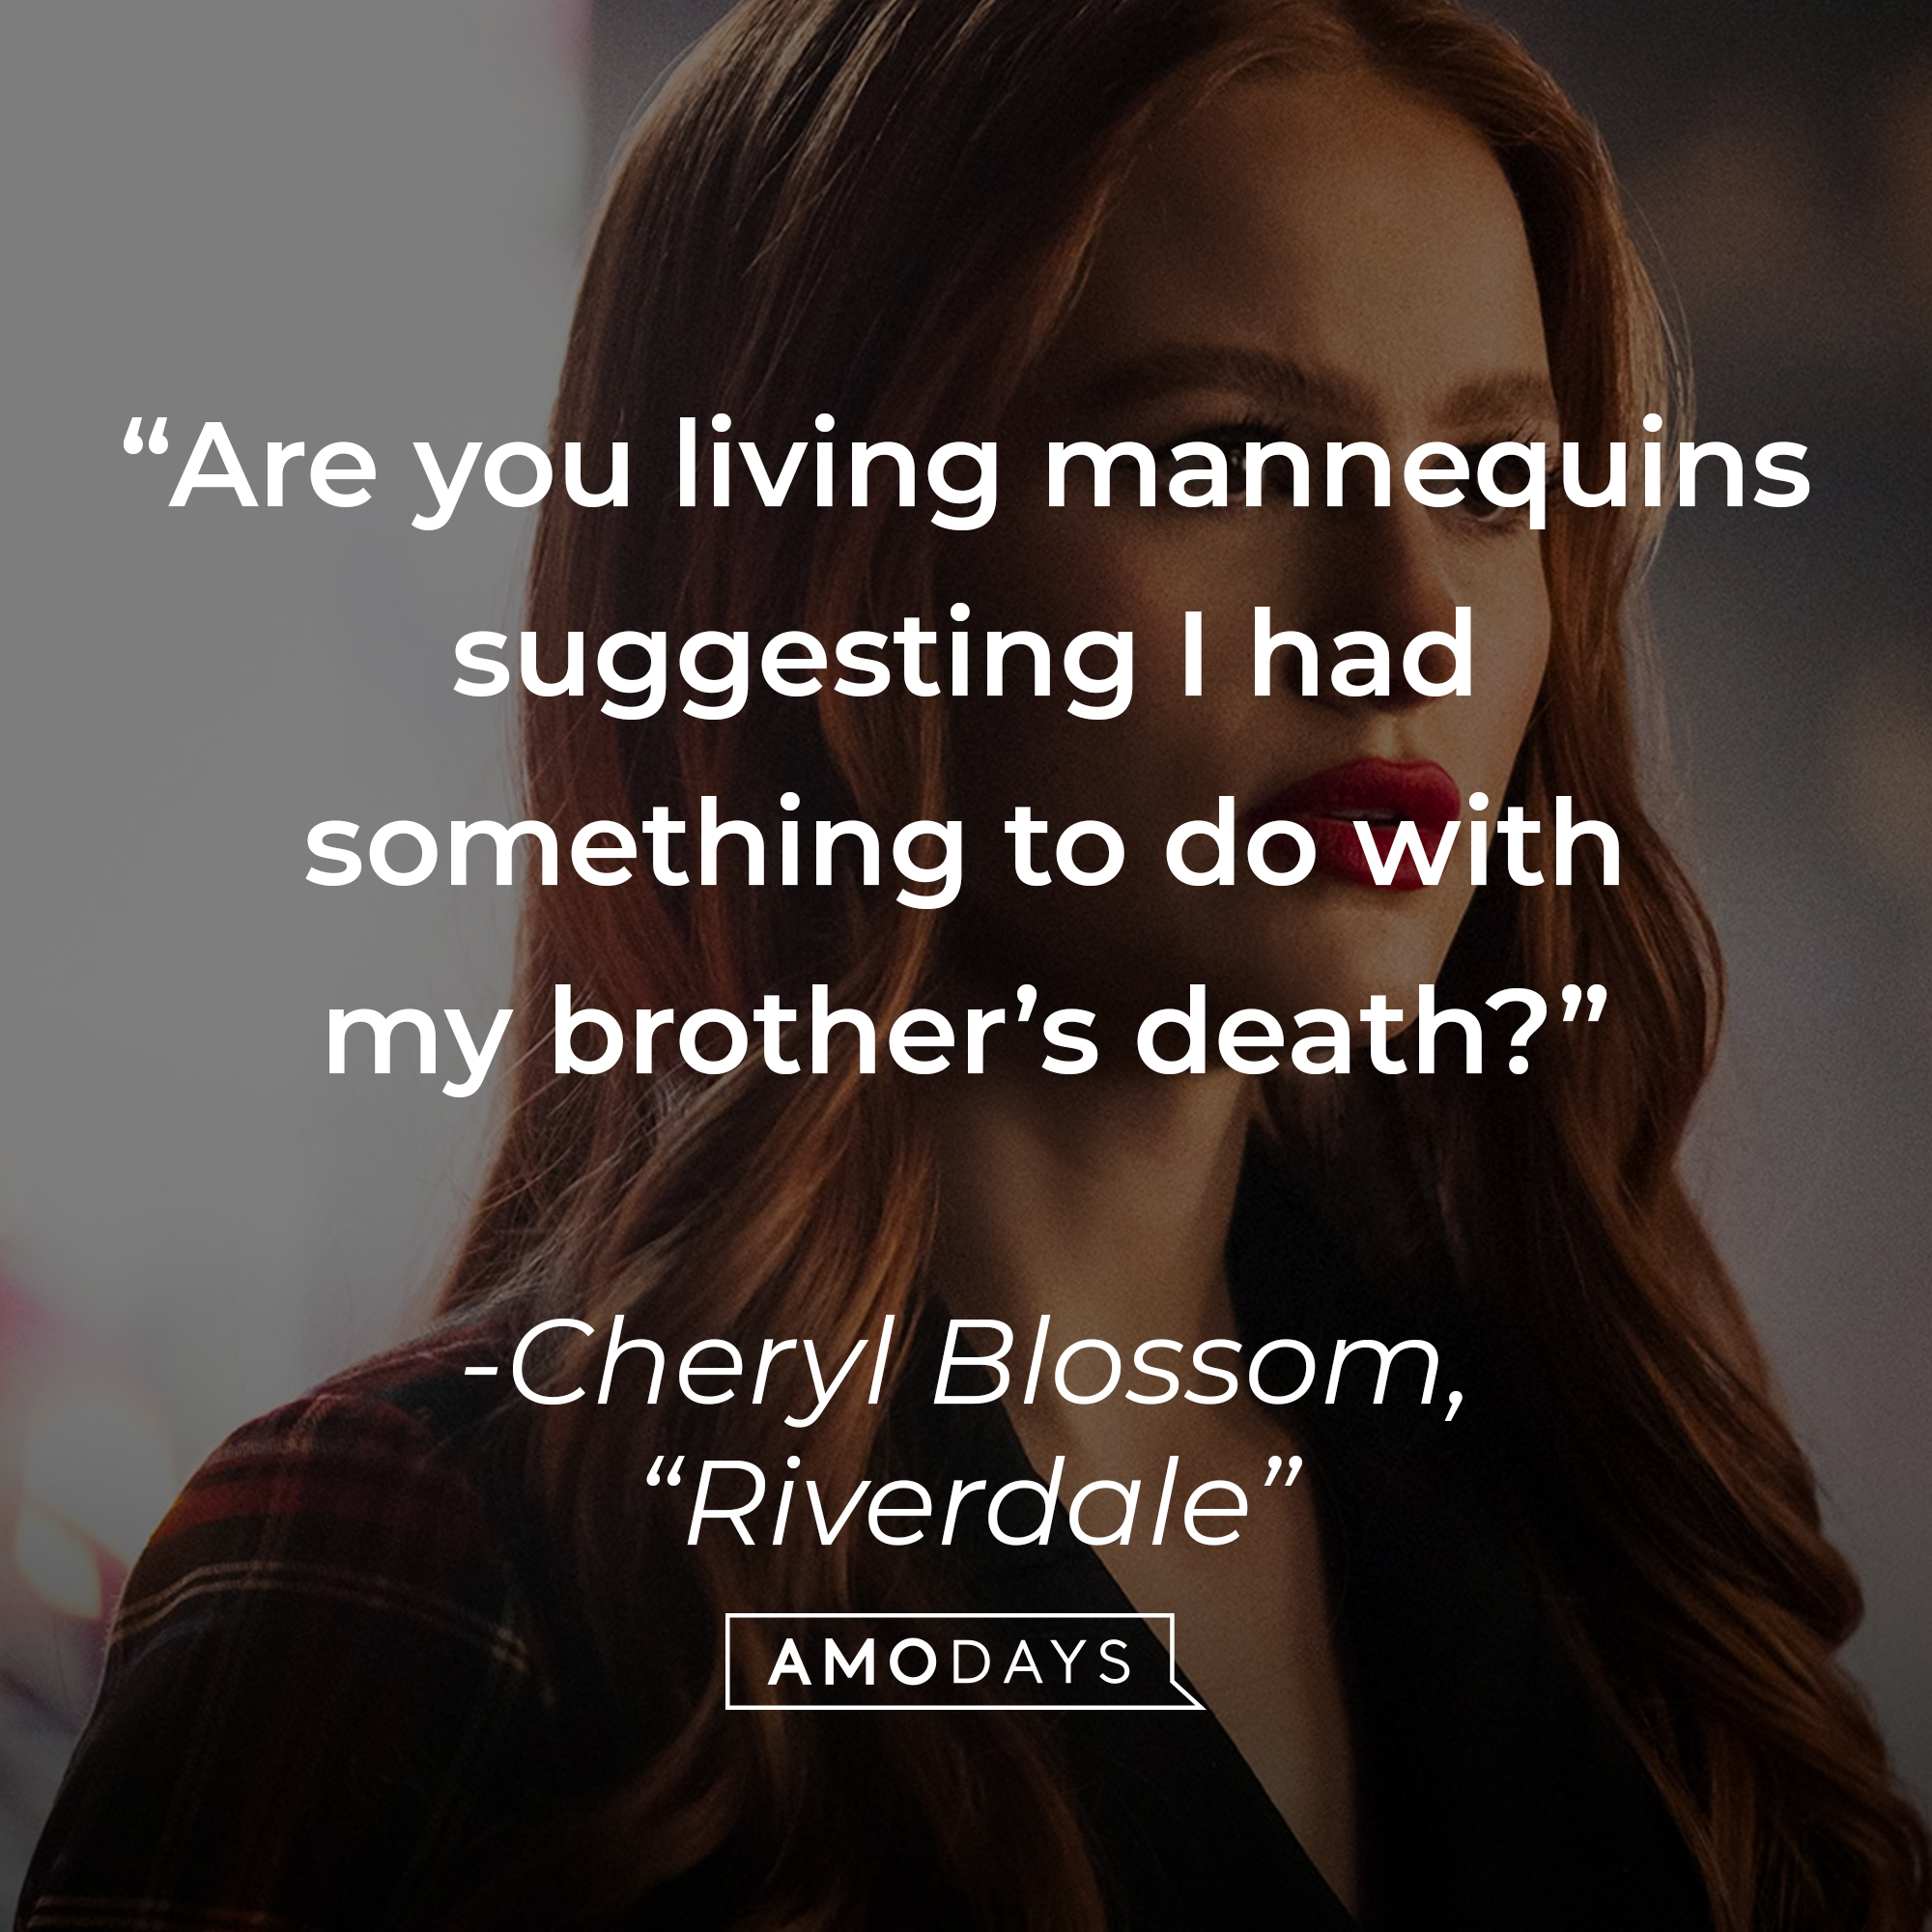 Cheryl Blossom with her quote: "Are you living mannequins suggesting I had something to do with my brother’s death?" | Source: Facebook.com/CWRiverdale